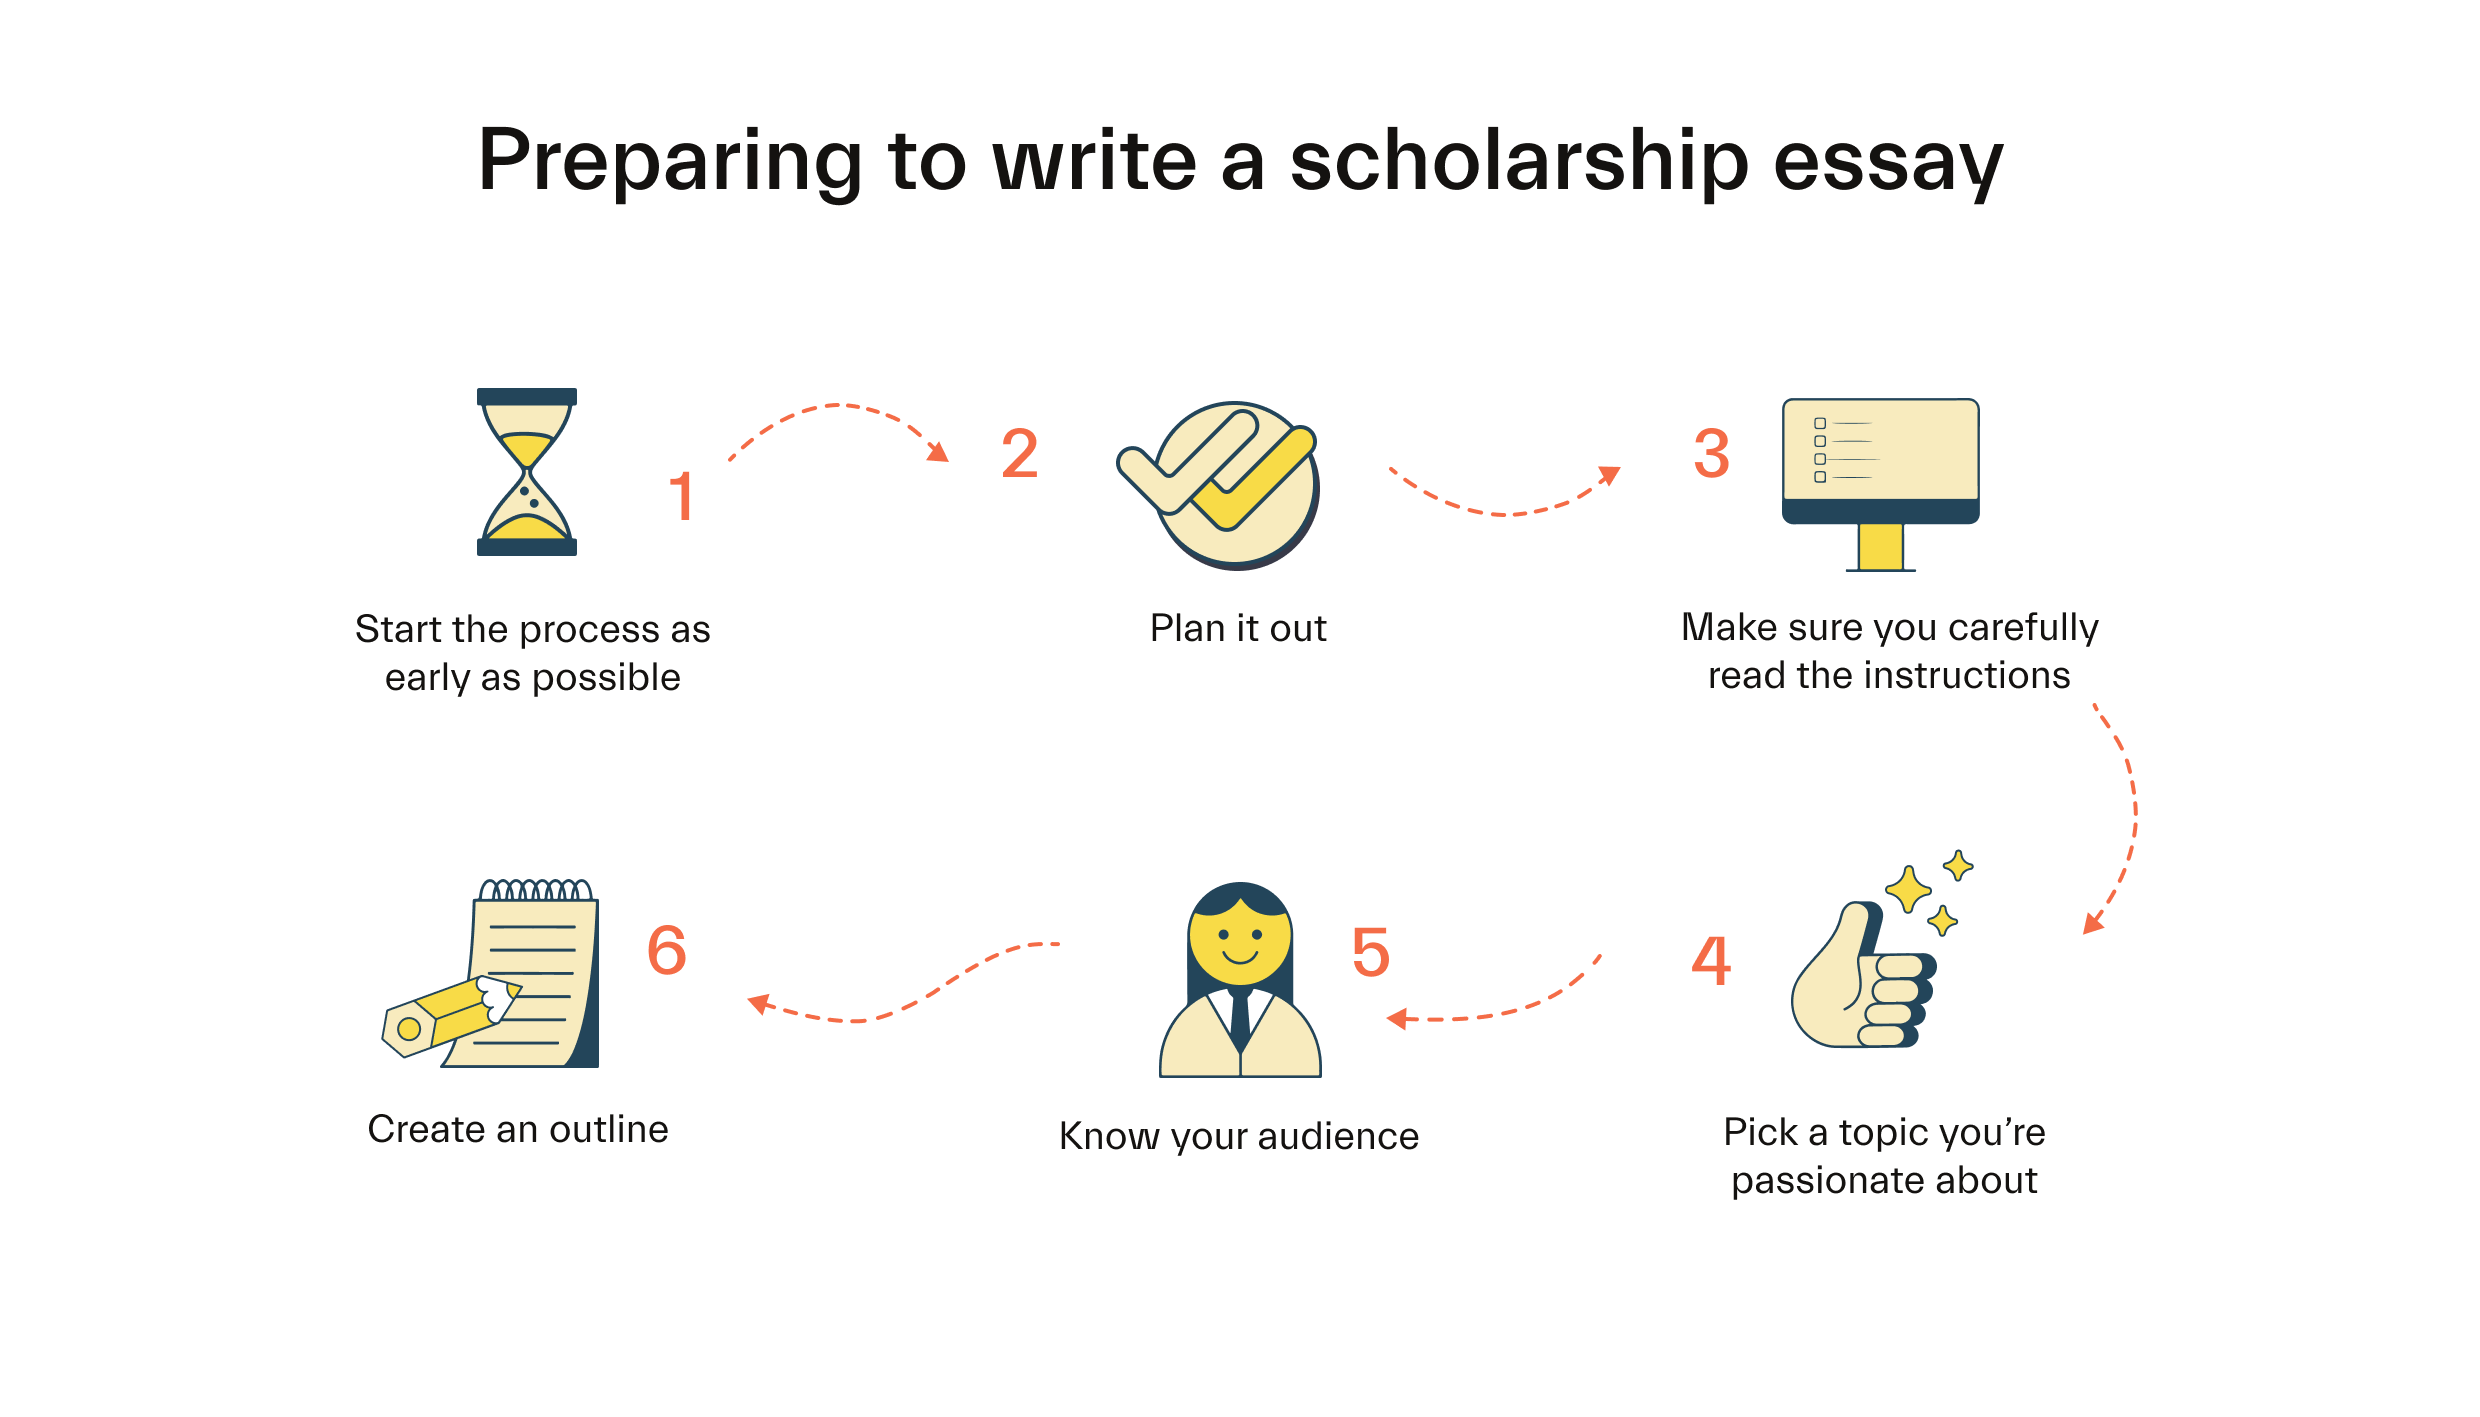 Steps for a Scholarship Essay